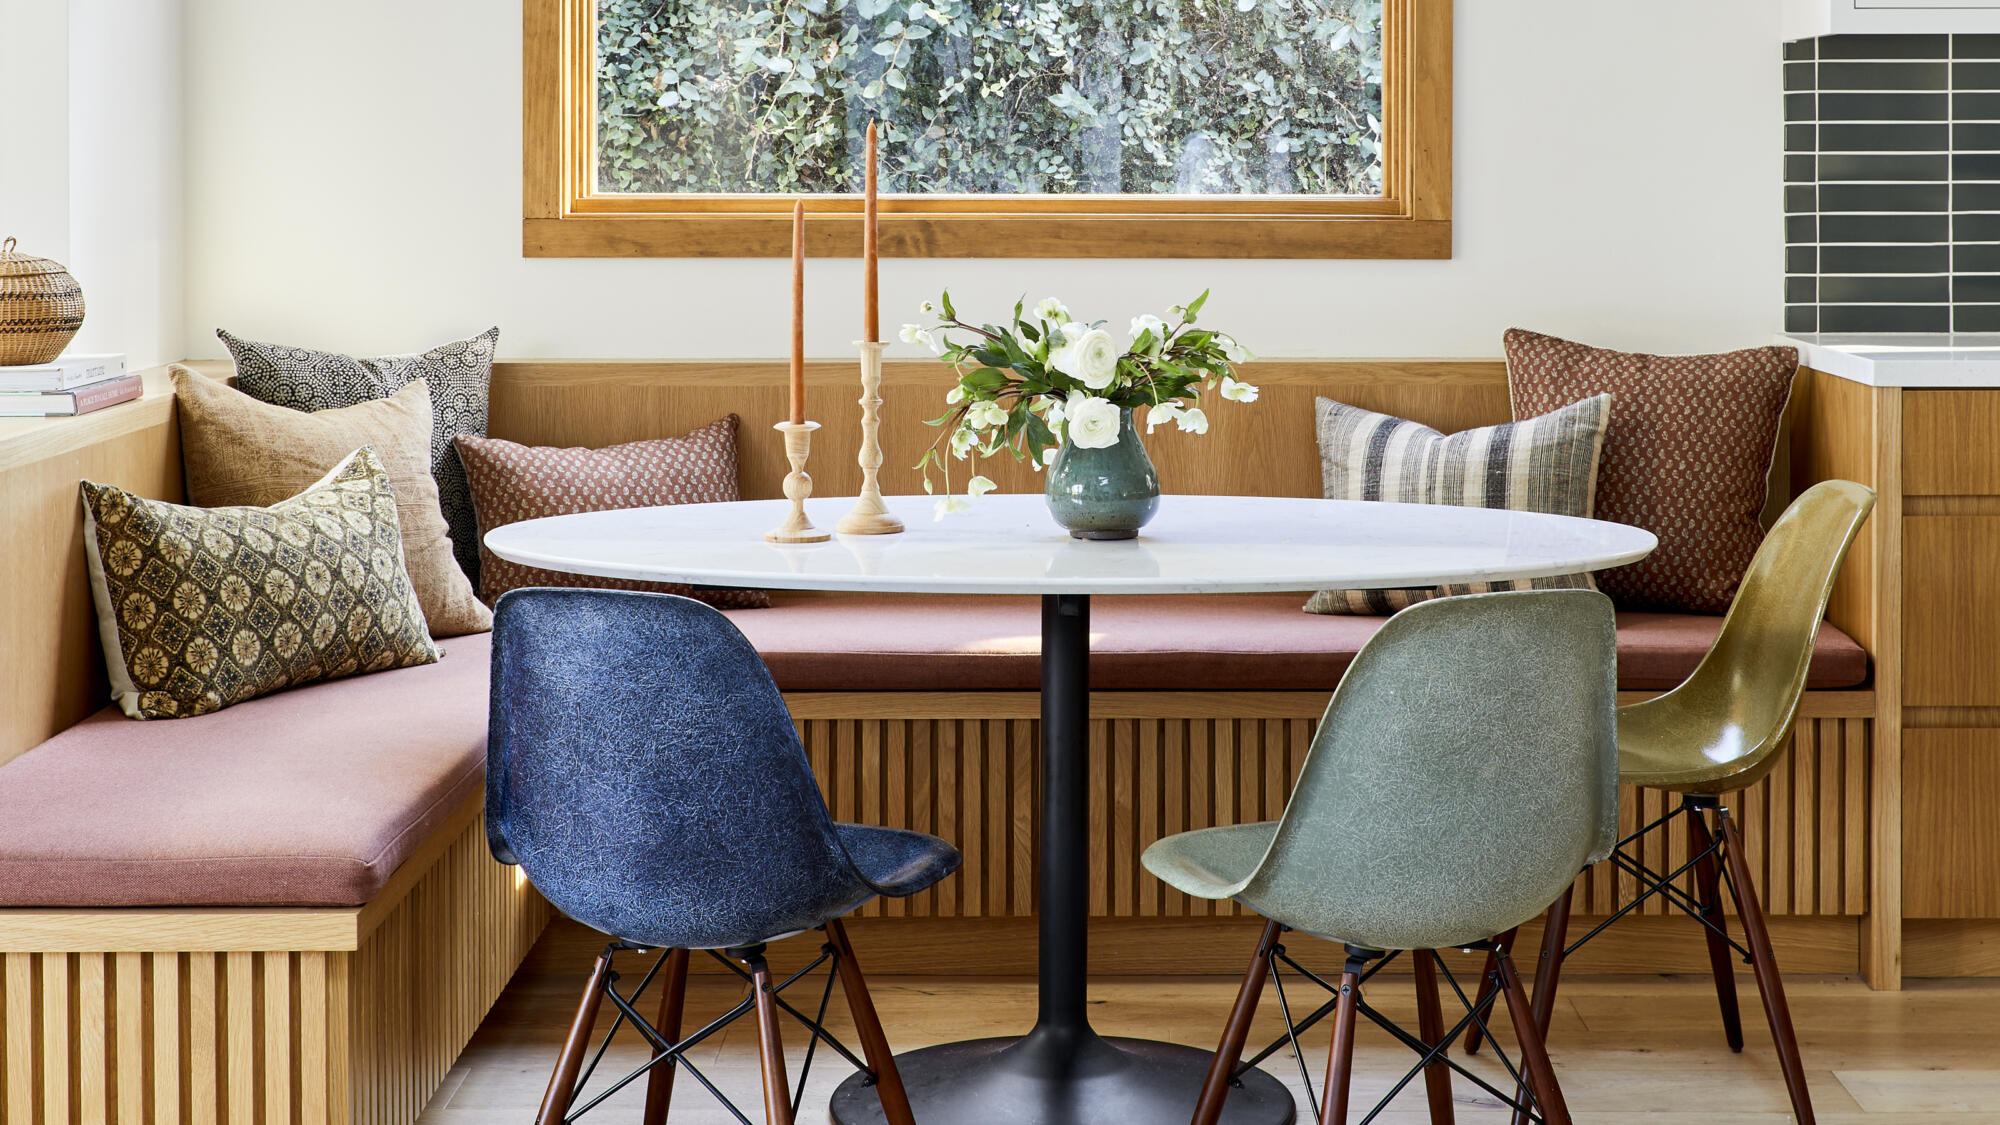 Cozy dining nook with modern chairs and wooden accents.